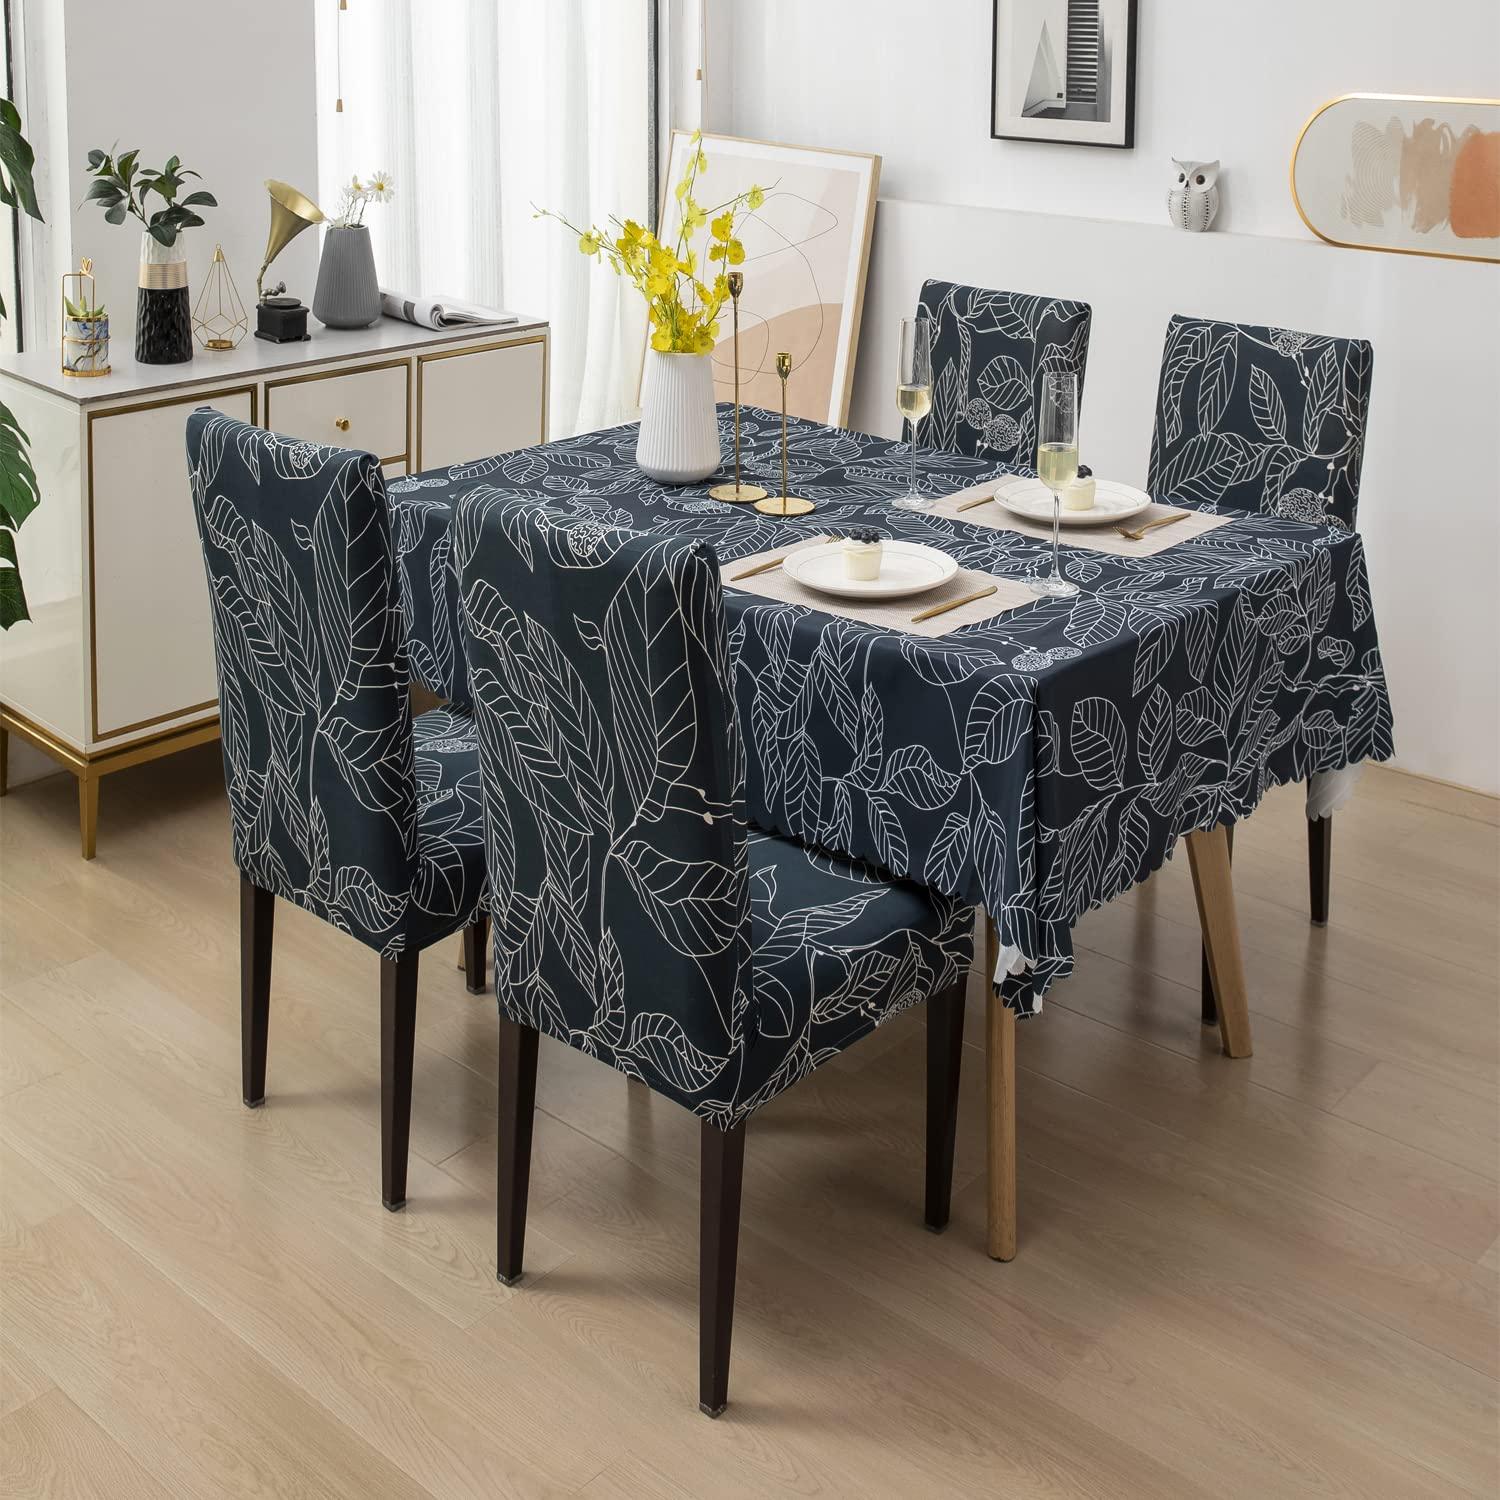 Premium Dining Table & Chair Cover Combo - Leafy Ash